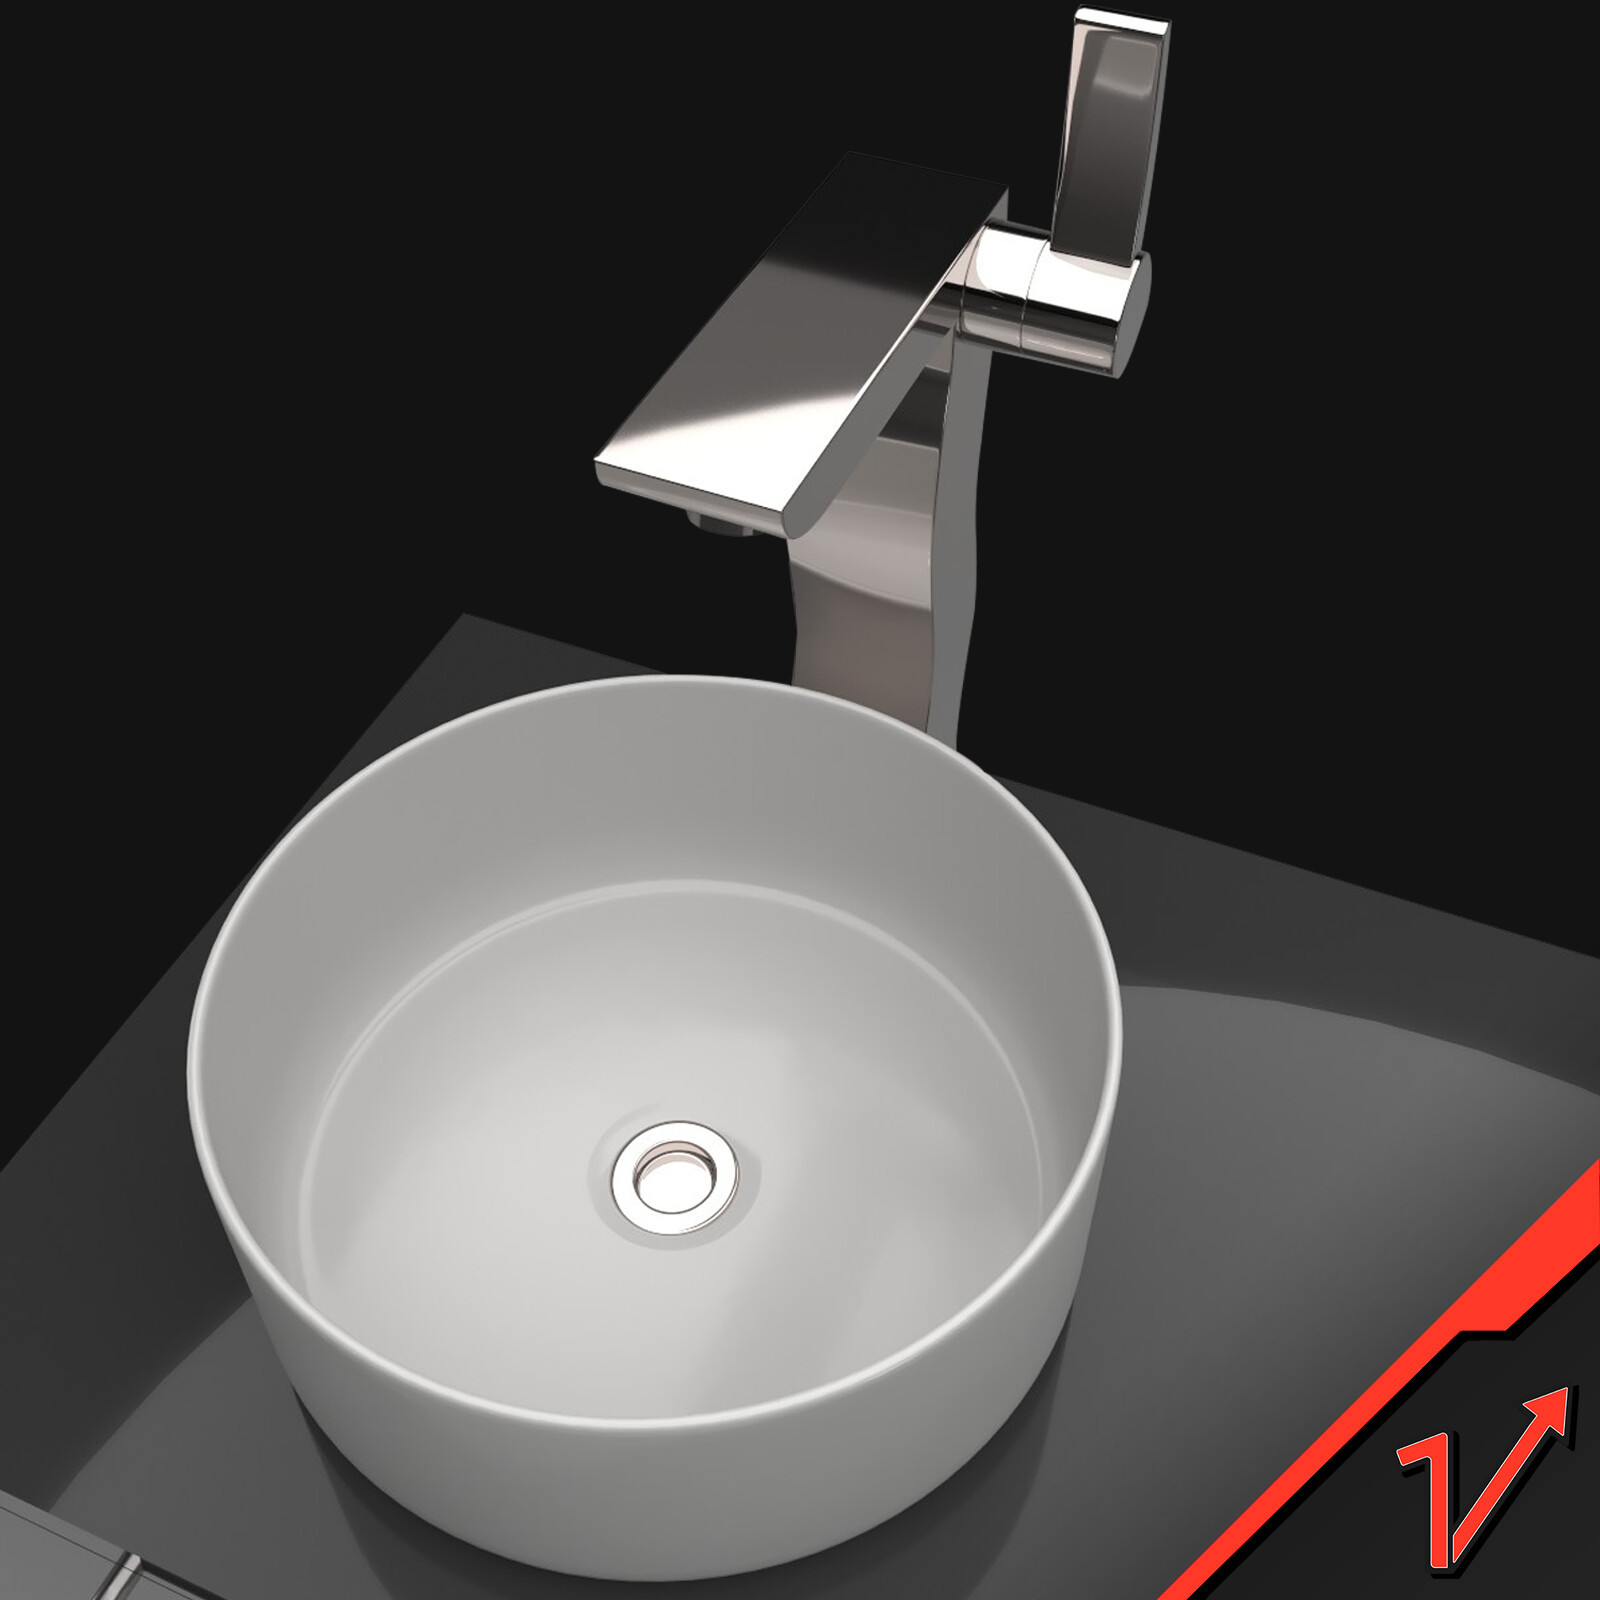 Sink with cabinet